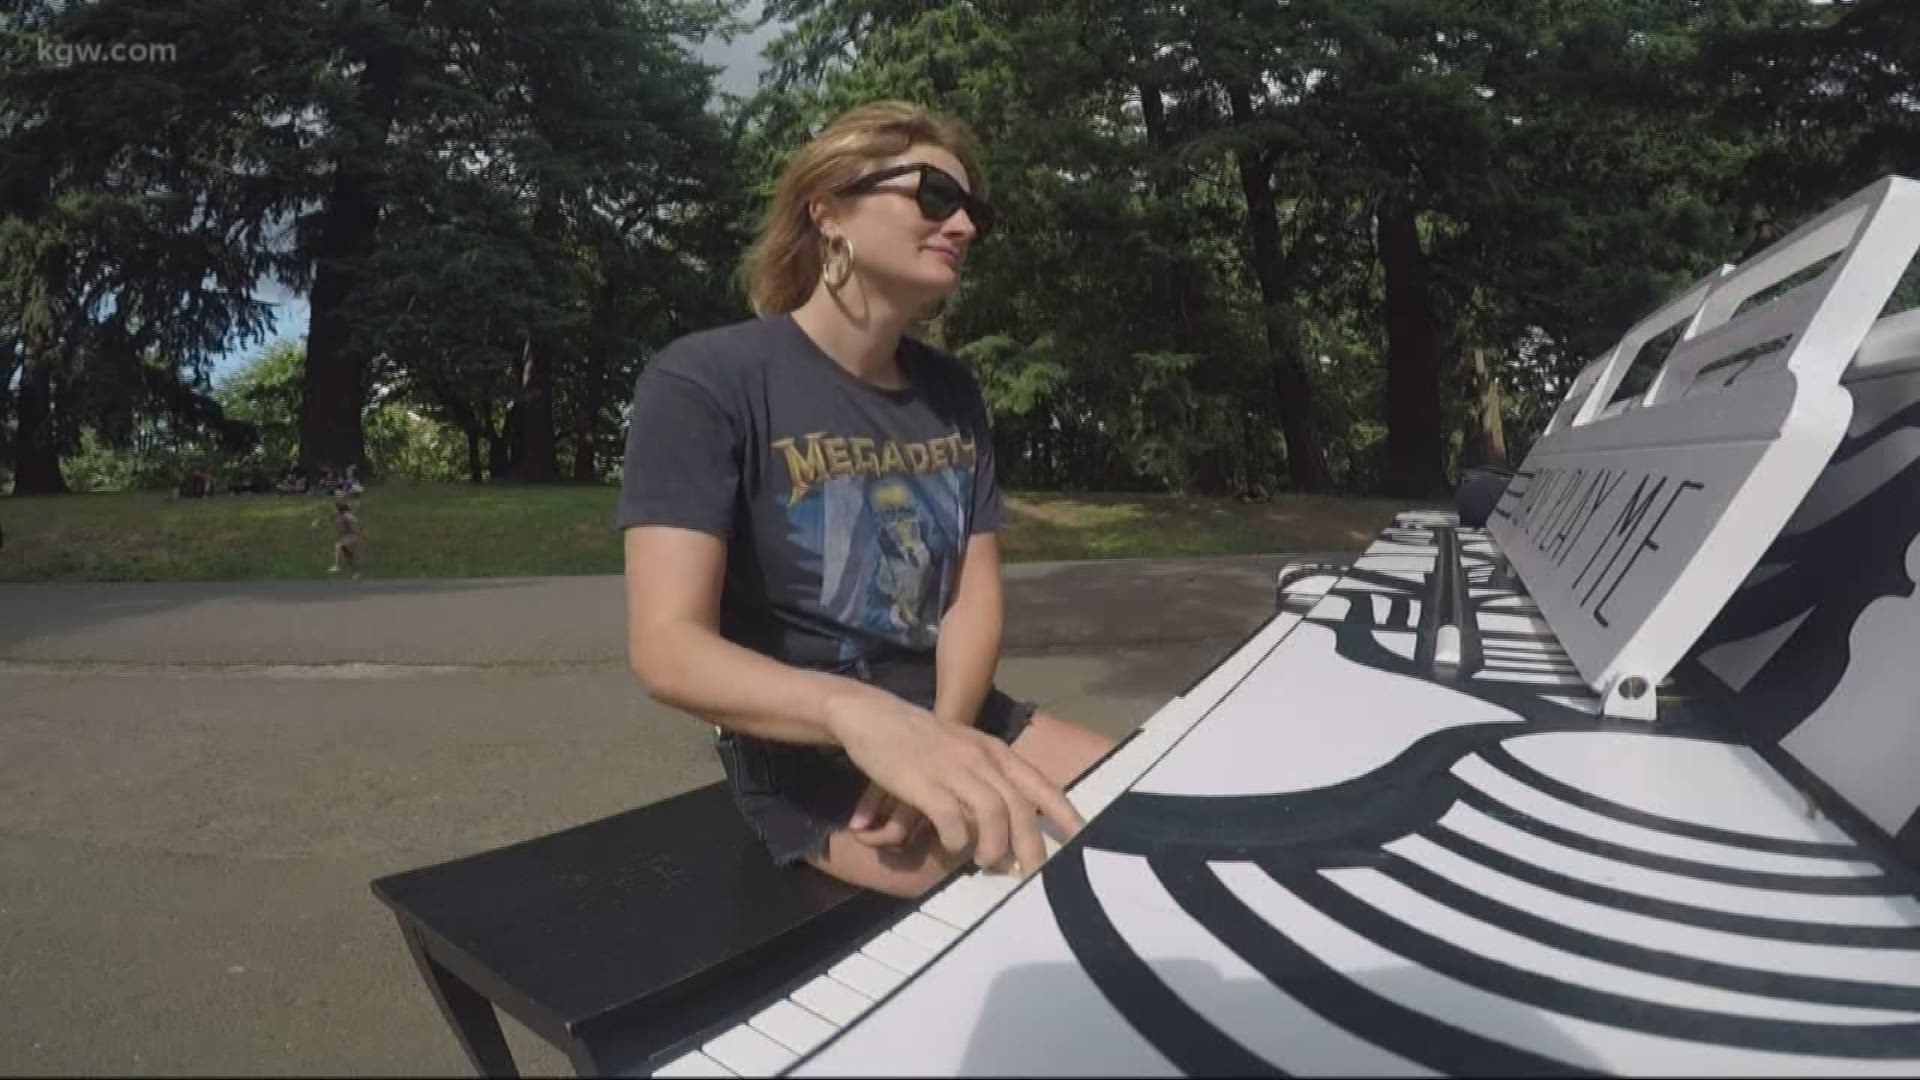 Pianos popping up around Portland parks for a good cause